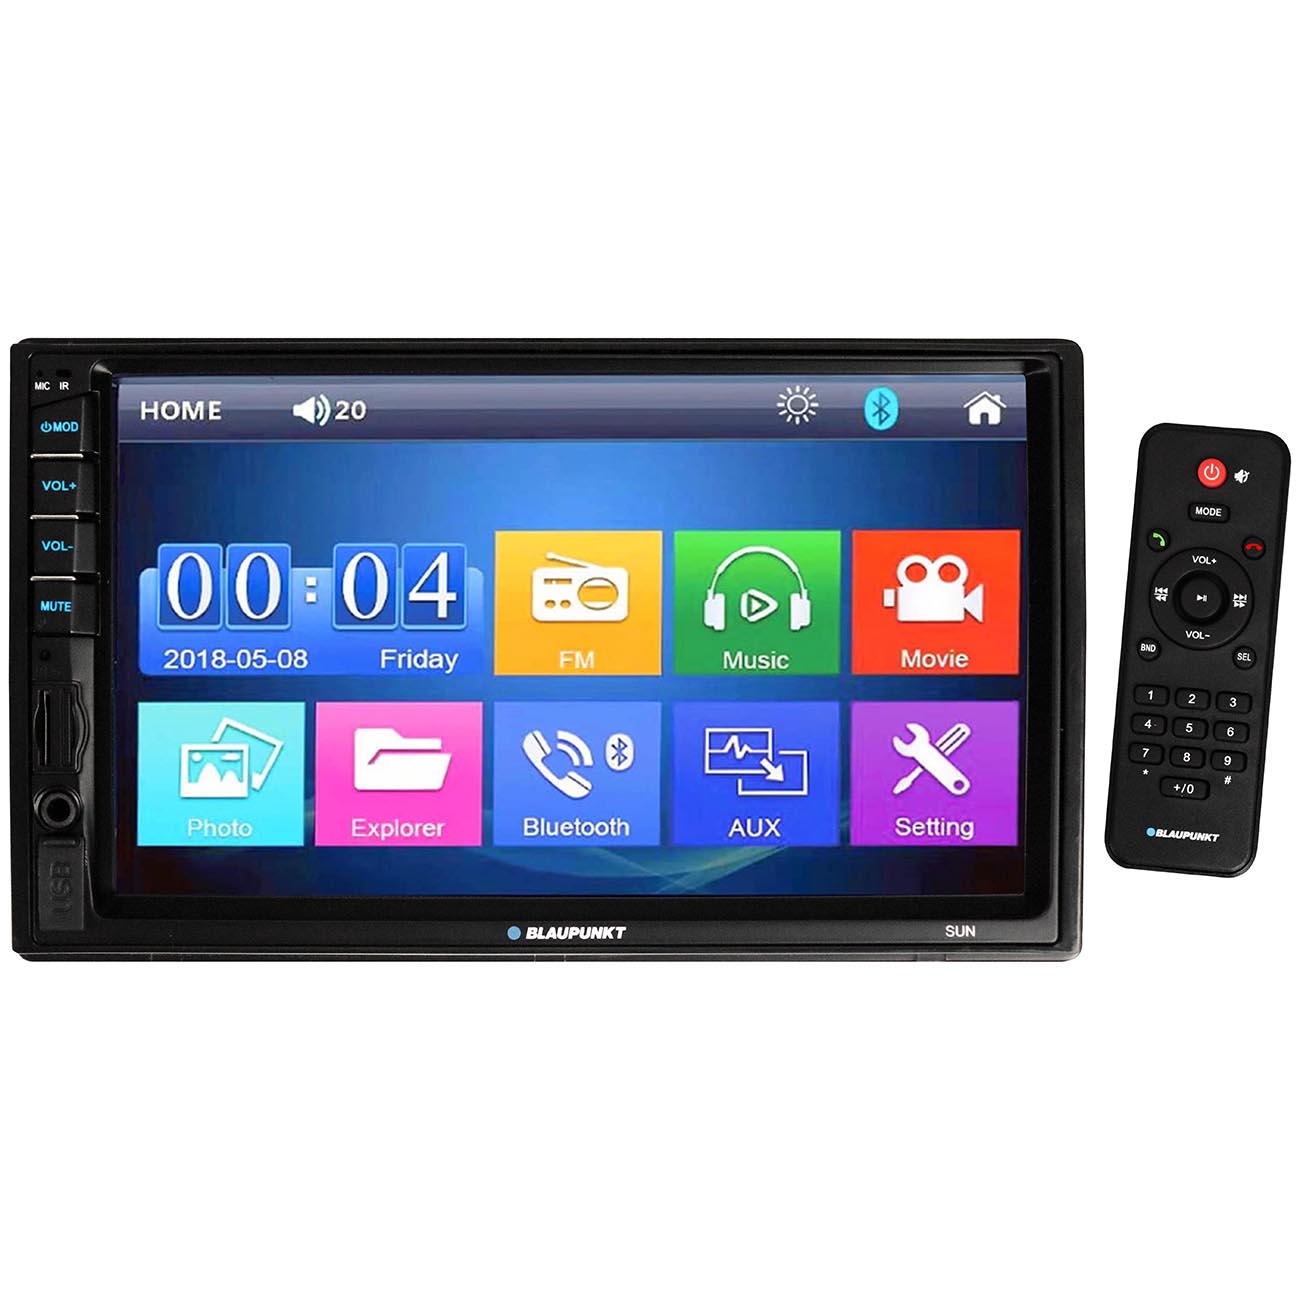 Blaupunkt 7.0” Double DIN MECHLESS Fixed Face Touchscreen Receiver with MirrorLink, Bluetooth, USB/SD Inputs and Remote